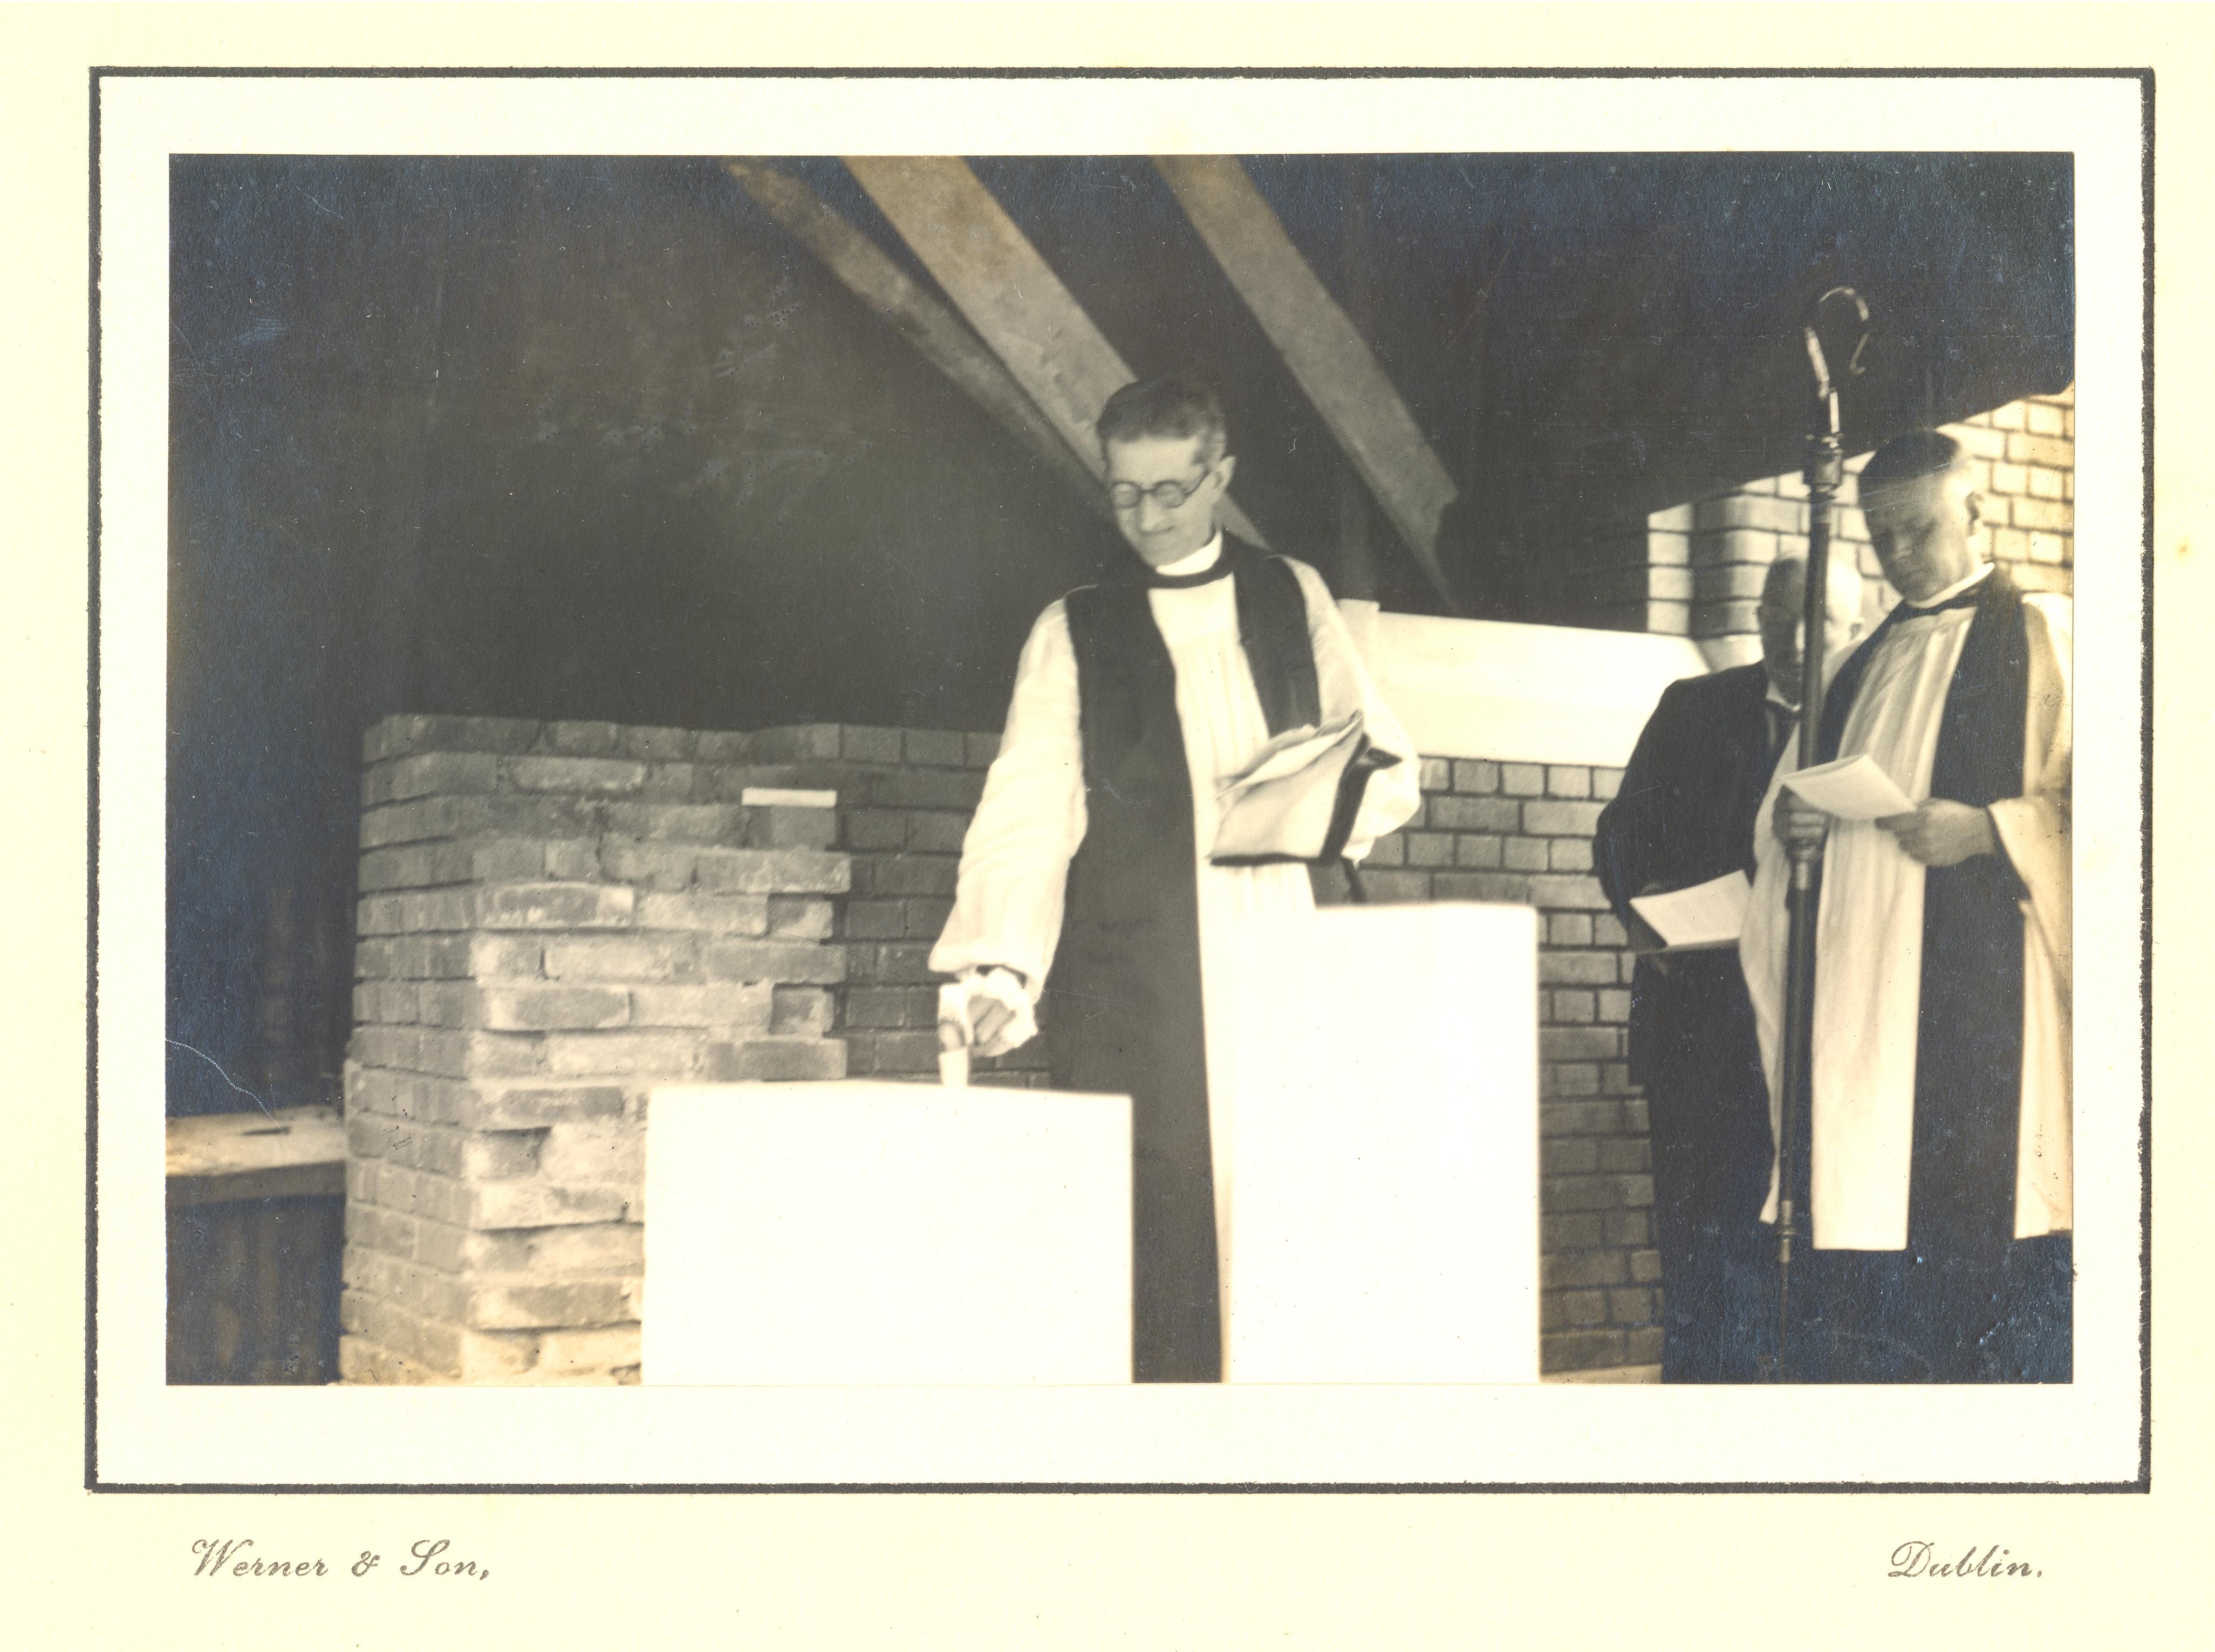 The Most Revd Dr Gregg with the ceremonial hammer. P.80.29.2